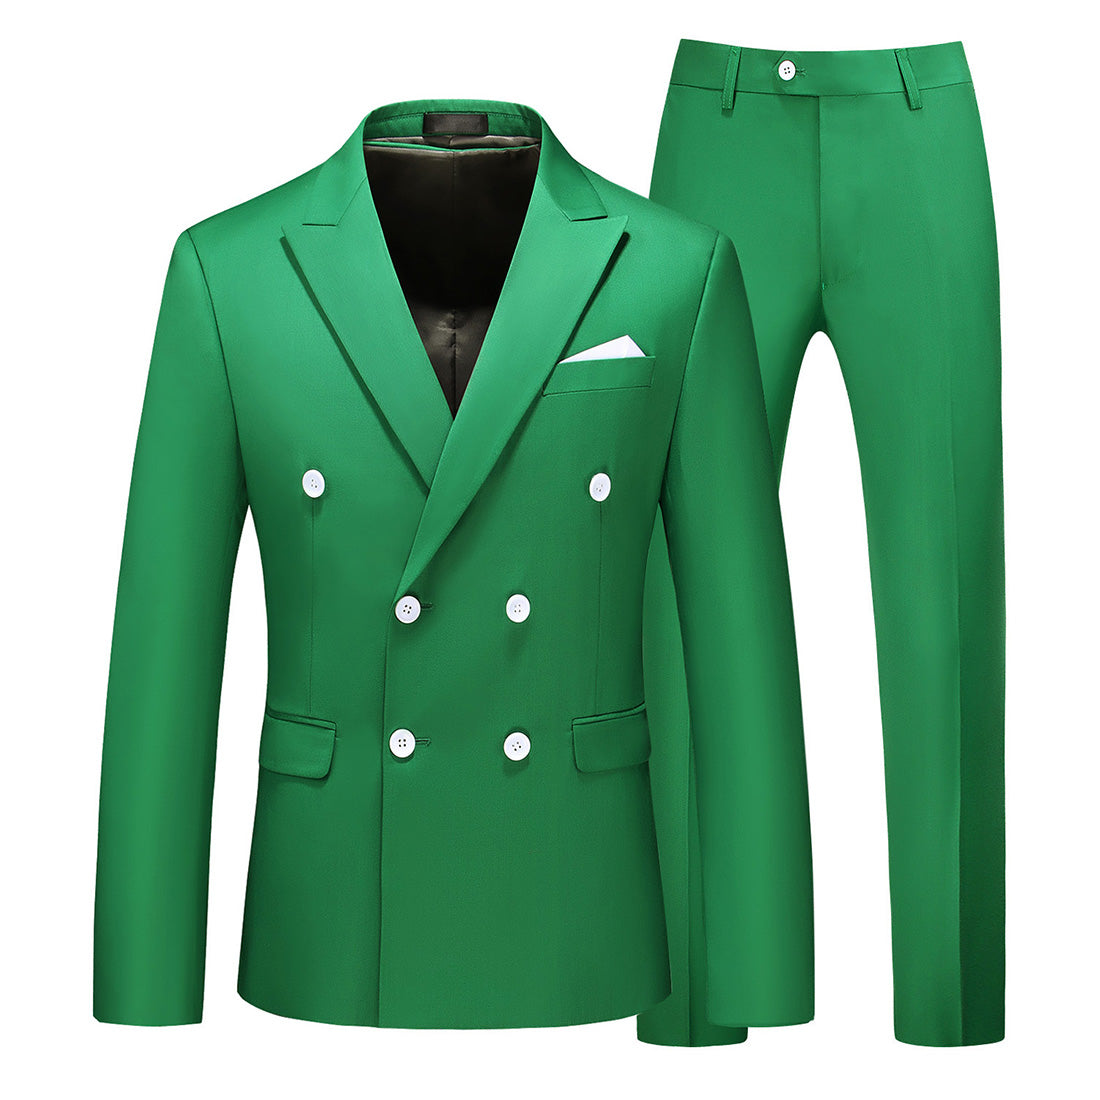 Men 2 Piece Double Breasted Suit With 10 Solid Colors